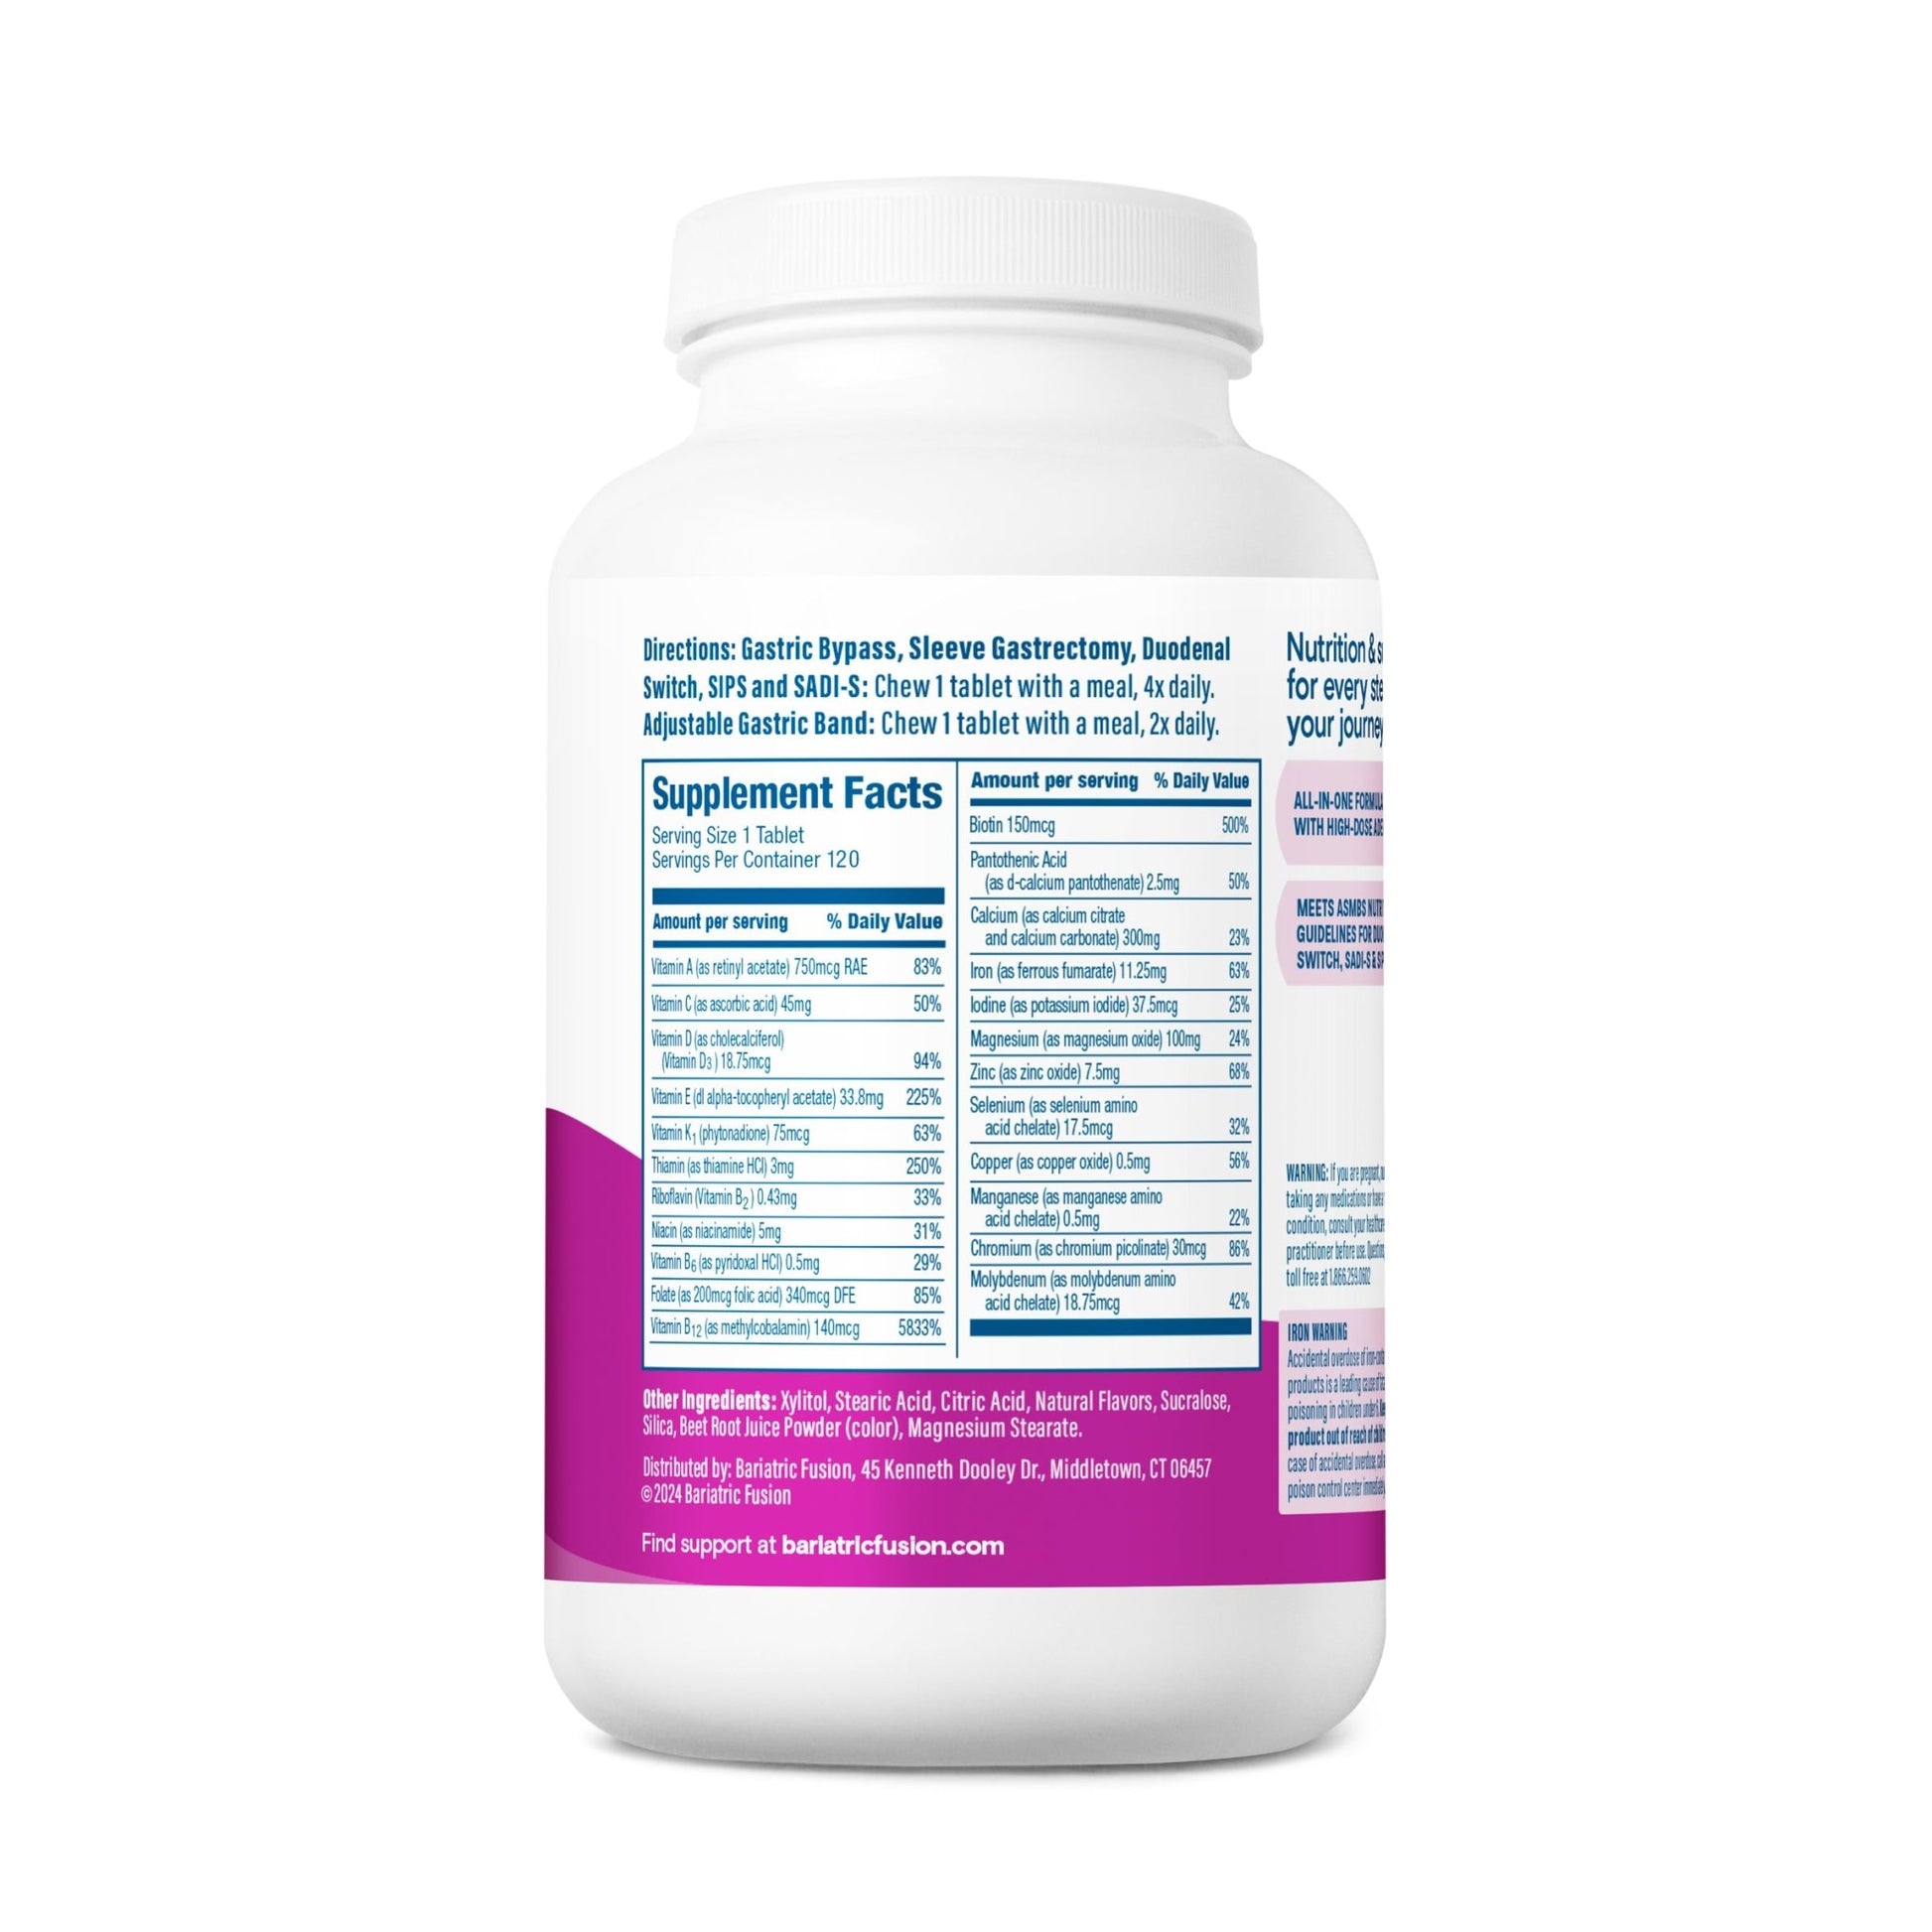 Bariatric Fusion Mixed Berry Complete Chewable Bariatric Multivitamin ADEK directions, servings and ingredients.